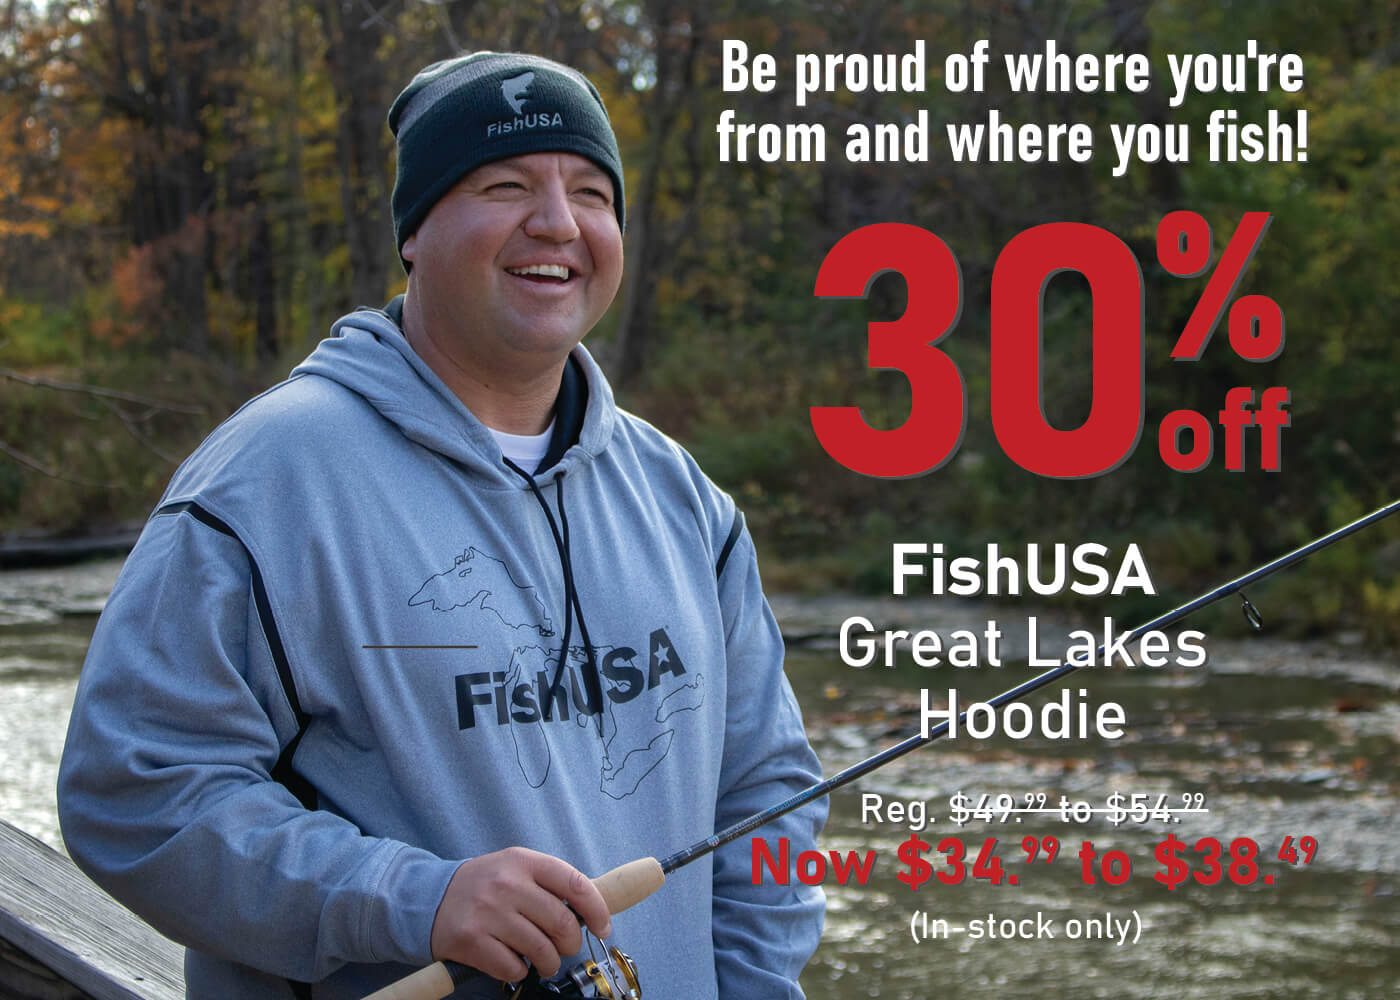 Save 30% on the FishUSA Great Lakes Hoodie